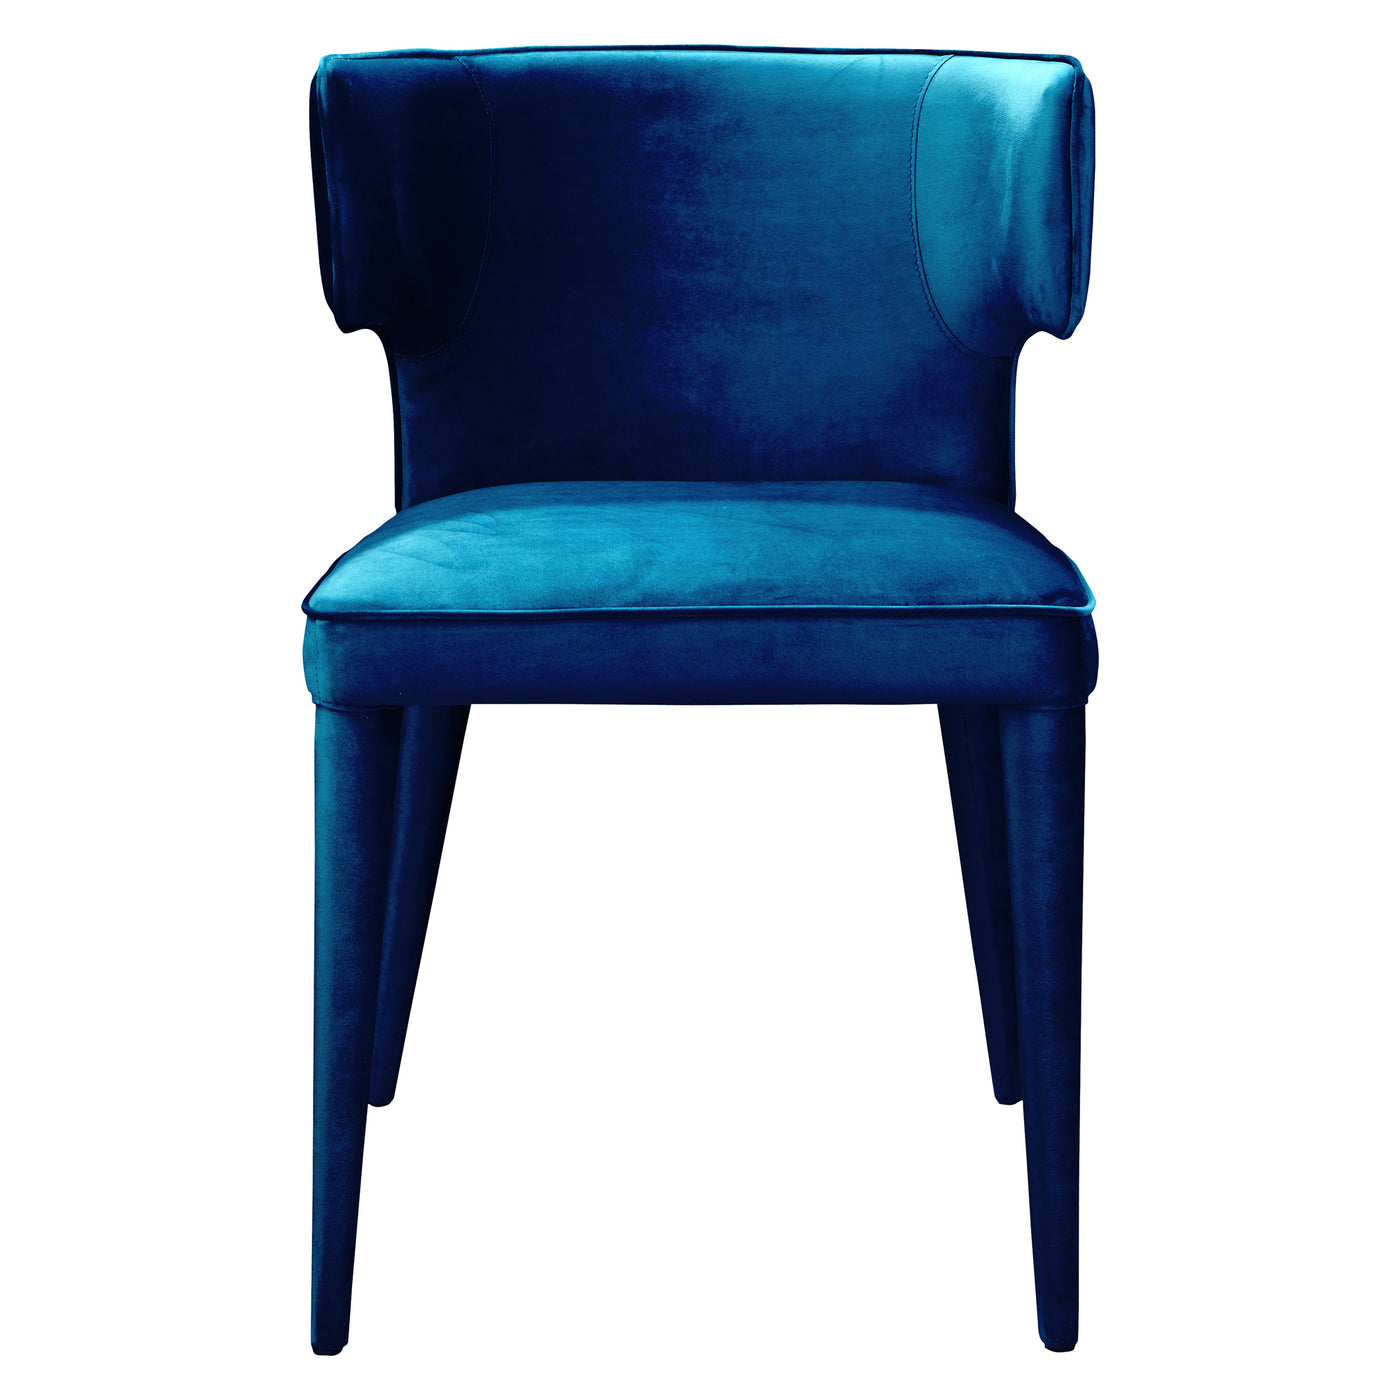 With an elegant, hourglass figure and a stunning teal, polyester-velvet upholstery, this is the perfect chair to add a pun...